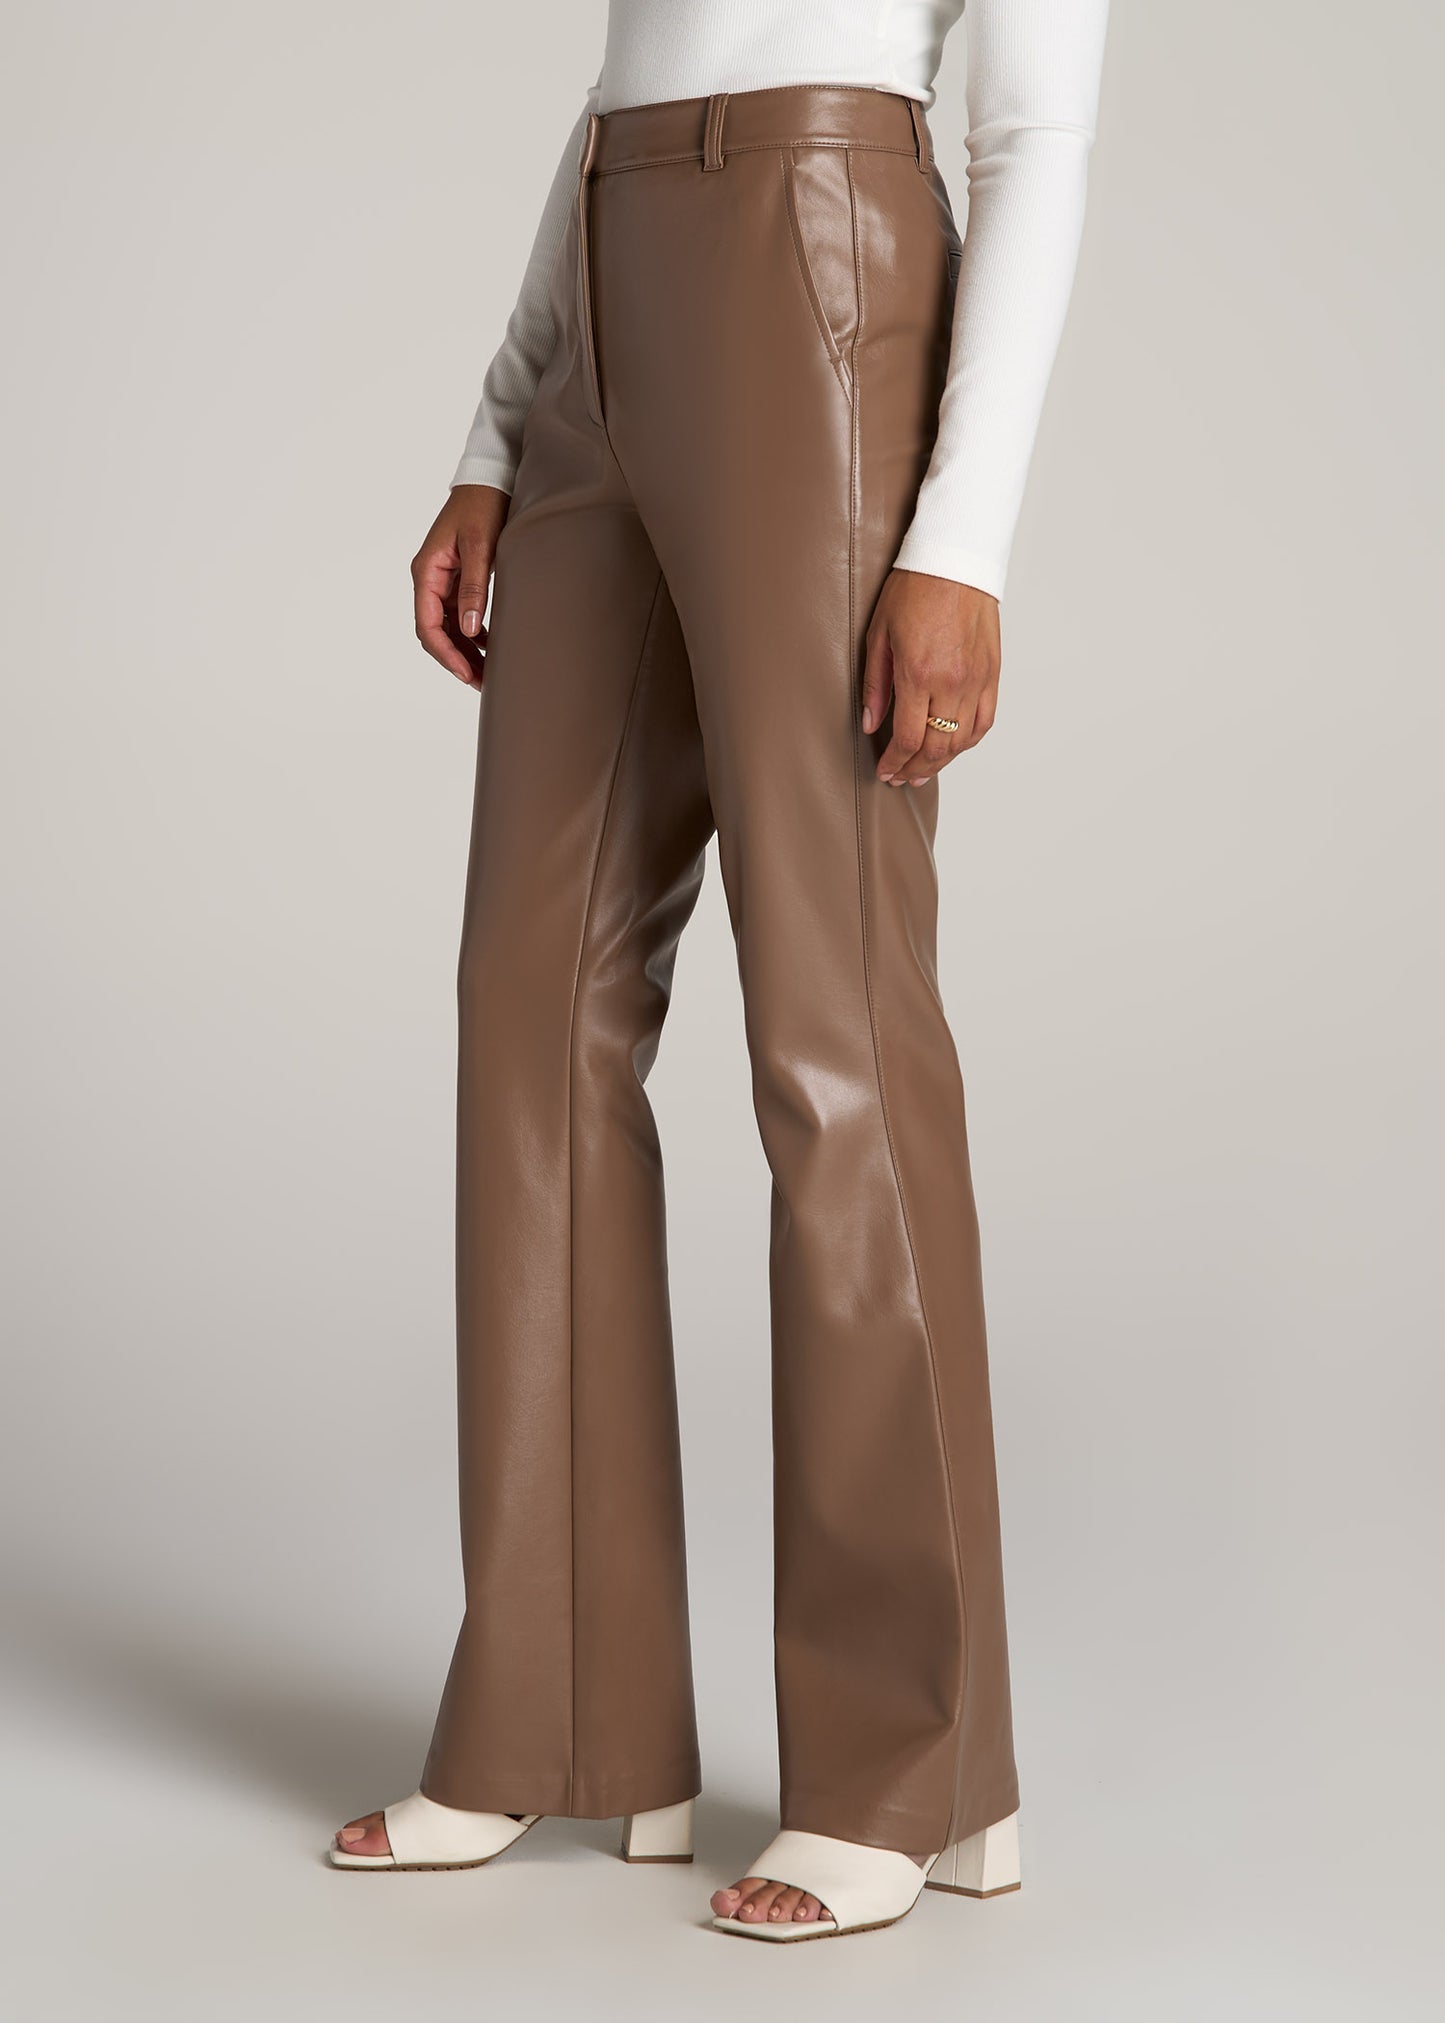 Men Bell Bottom Trousers Faux Leather Flared Pants Casual Office